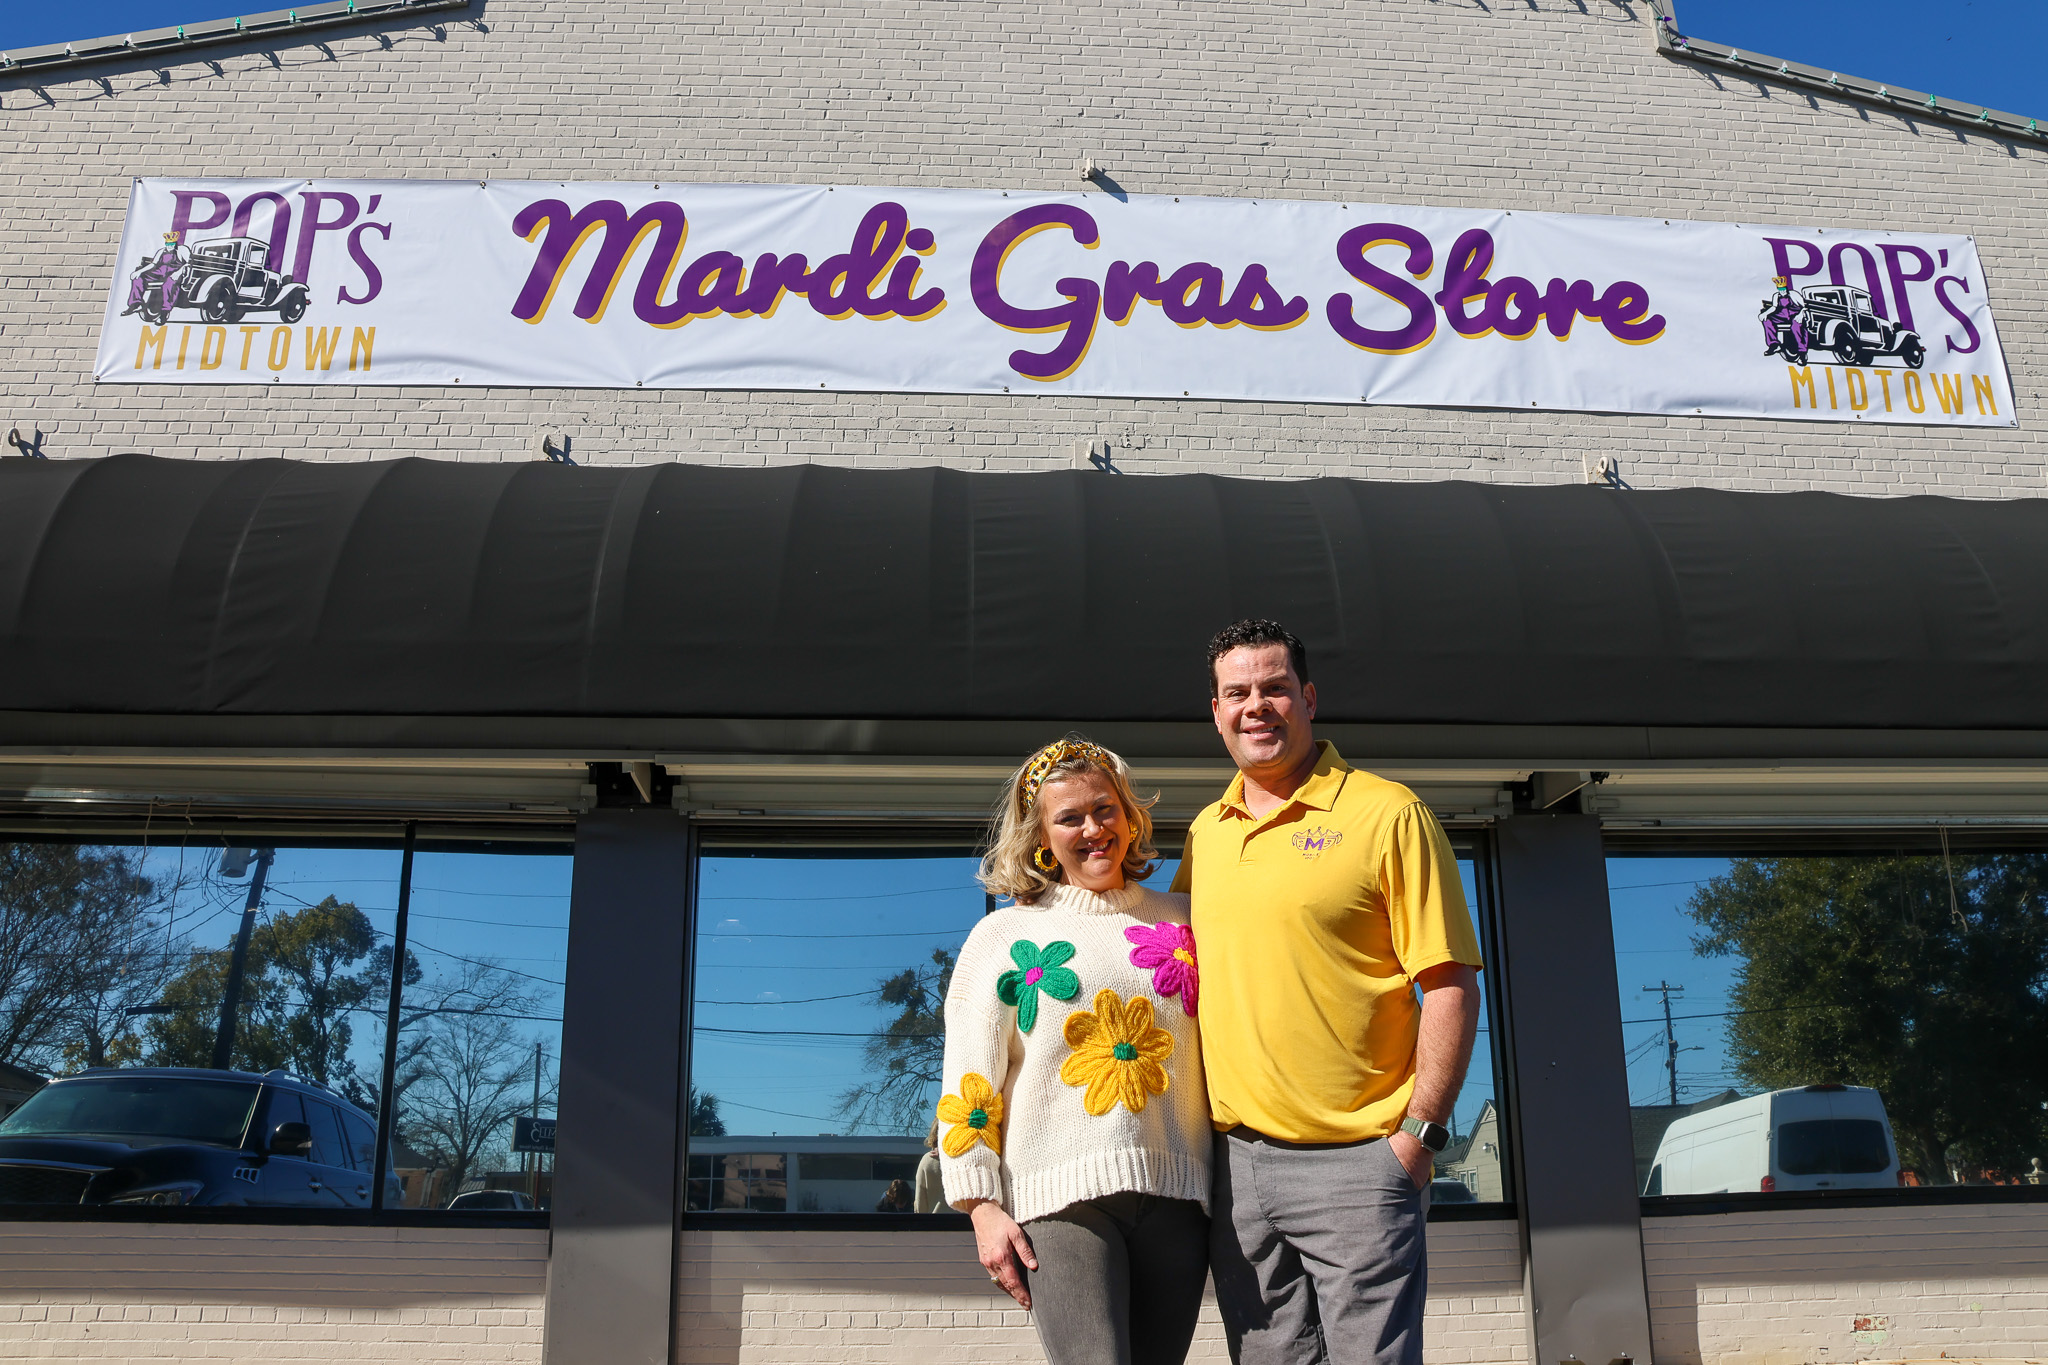 Mandi and Josh Cameron in front of Pop's Midtown